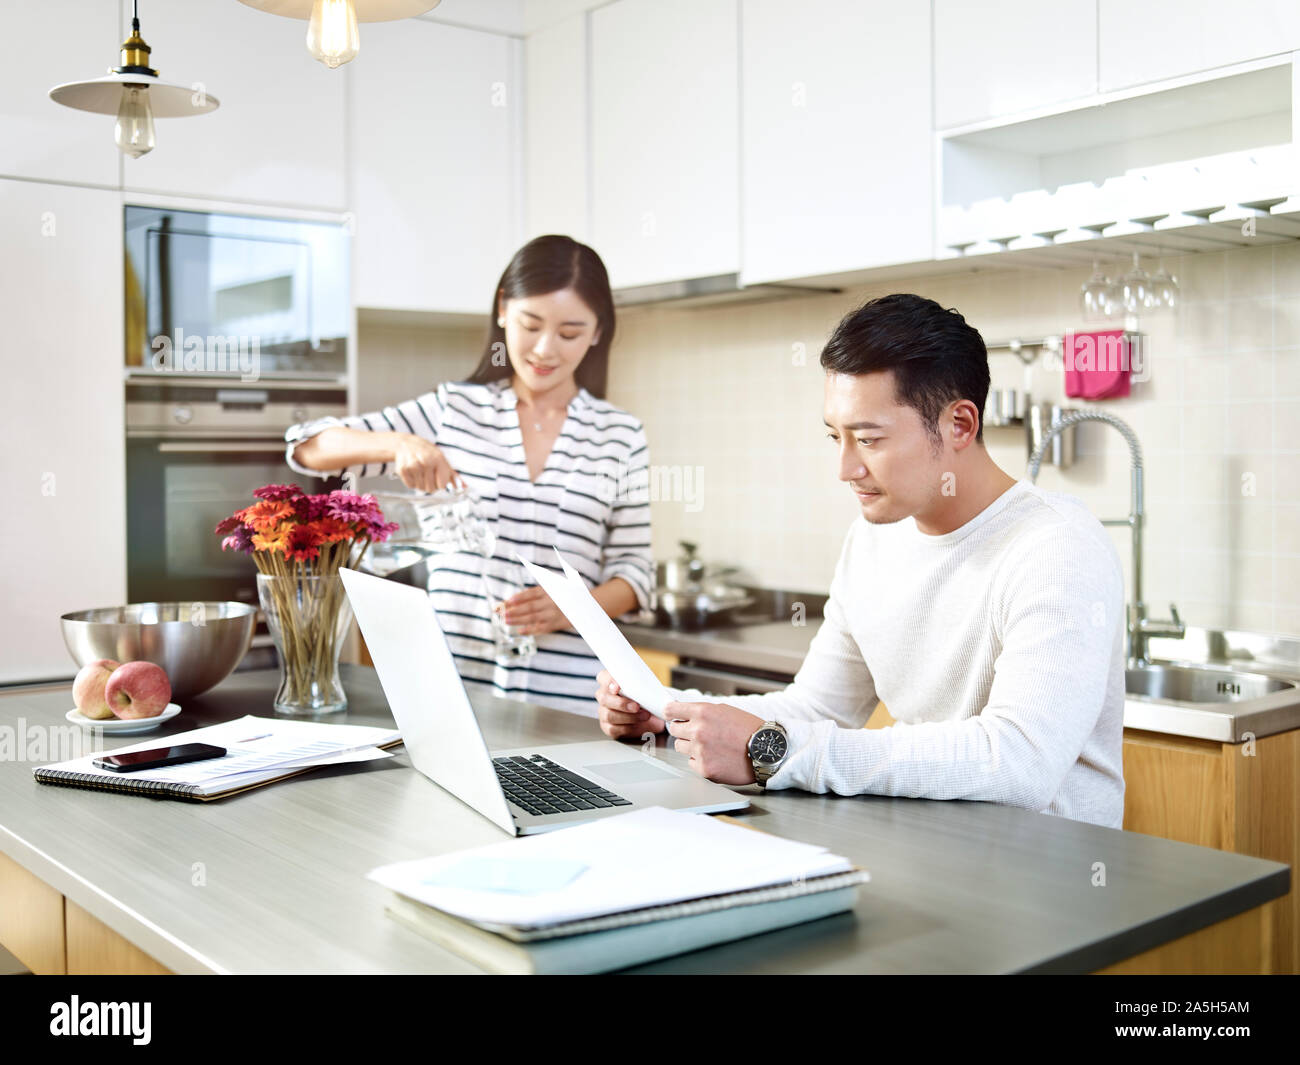 young asian man working at home using laptop computer while wife pouring a glass of water Stock Photo